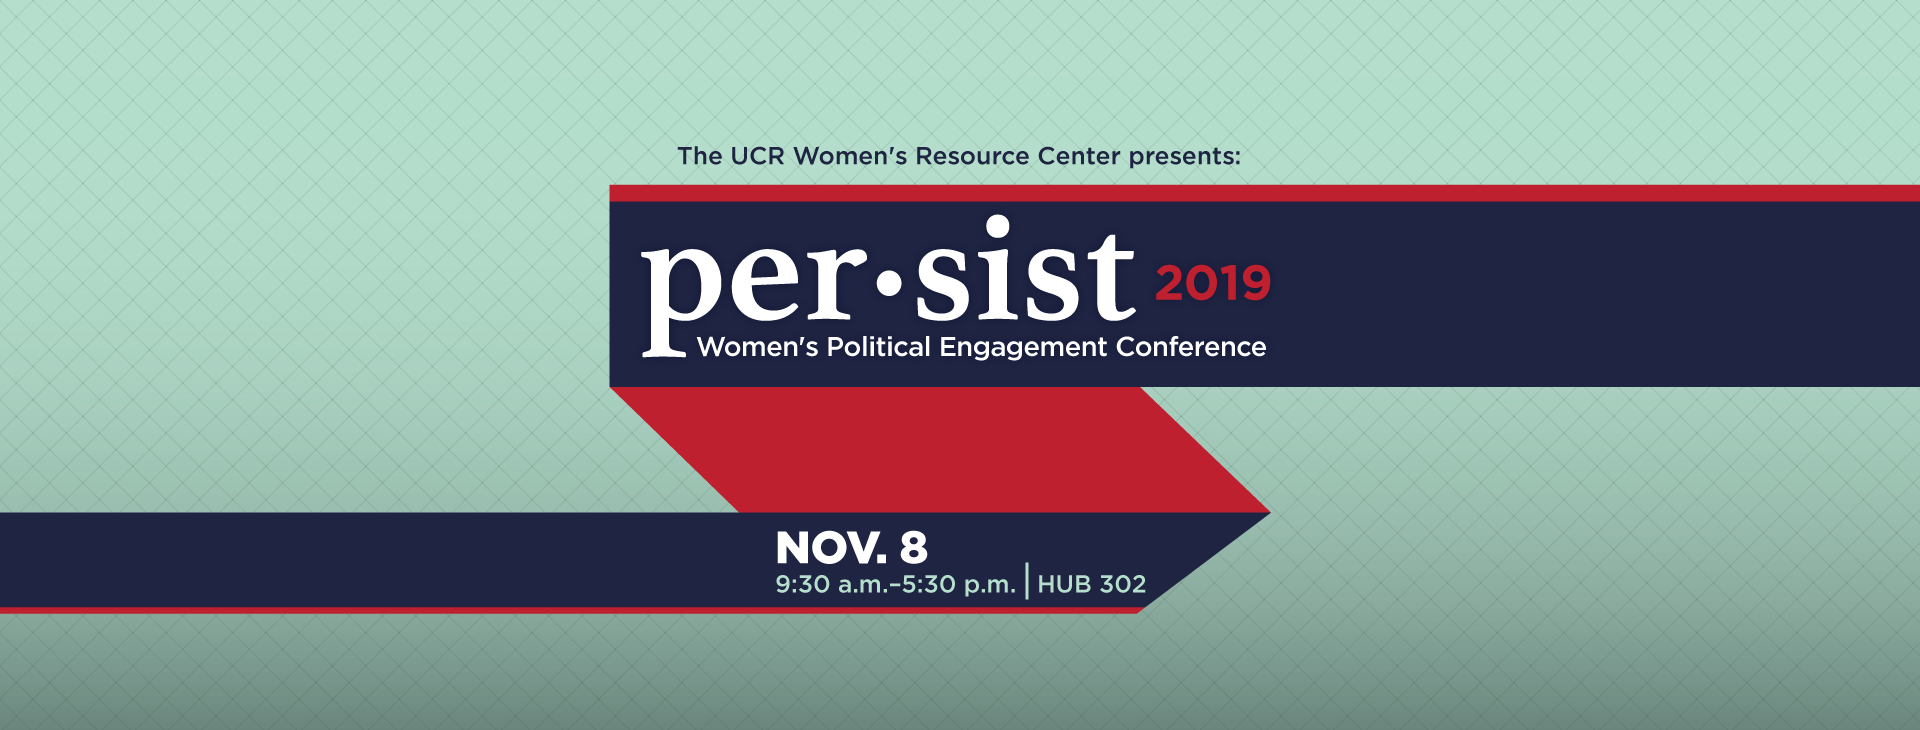 The UCR Women's Resource Center presents: Persist 2019 | Women's Political Engagement Conference | Nov. 8, 2019 at UC Riverside